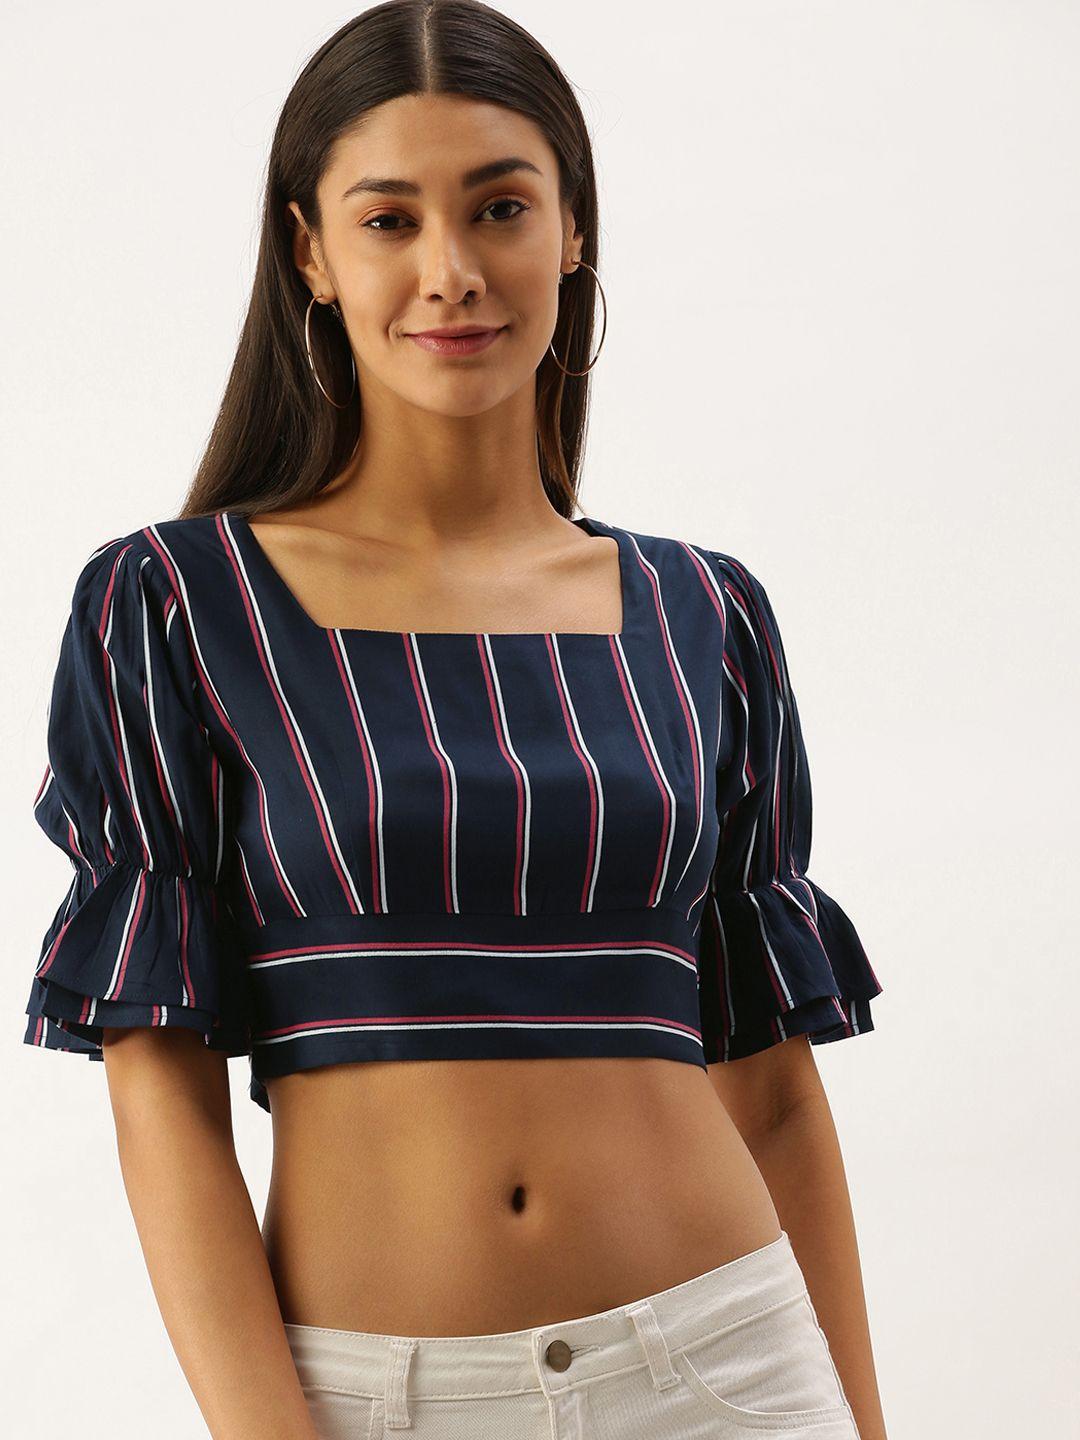 berrylush navy blue & white striped bell sleeves cinched waist crop top